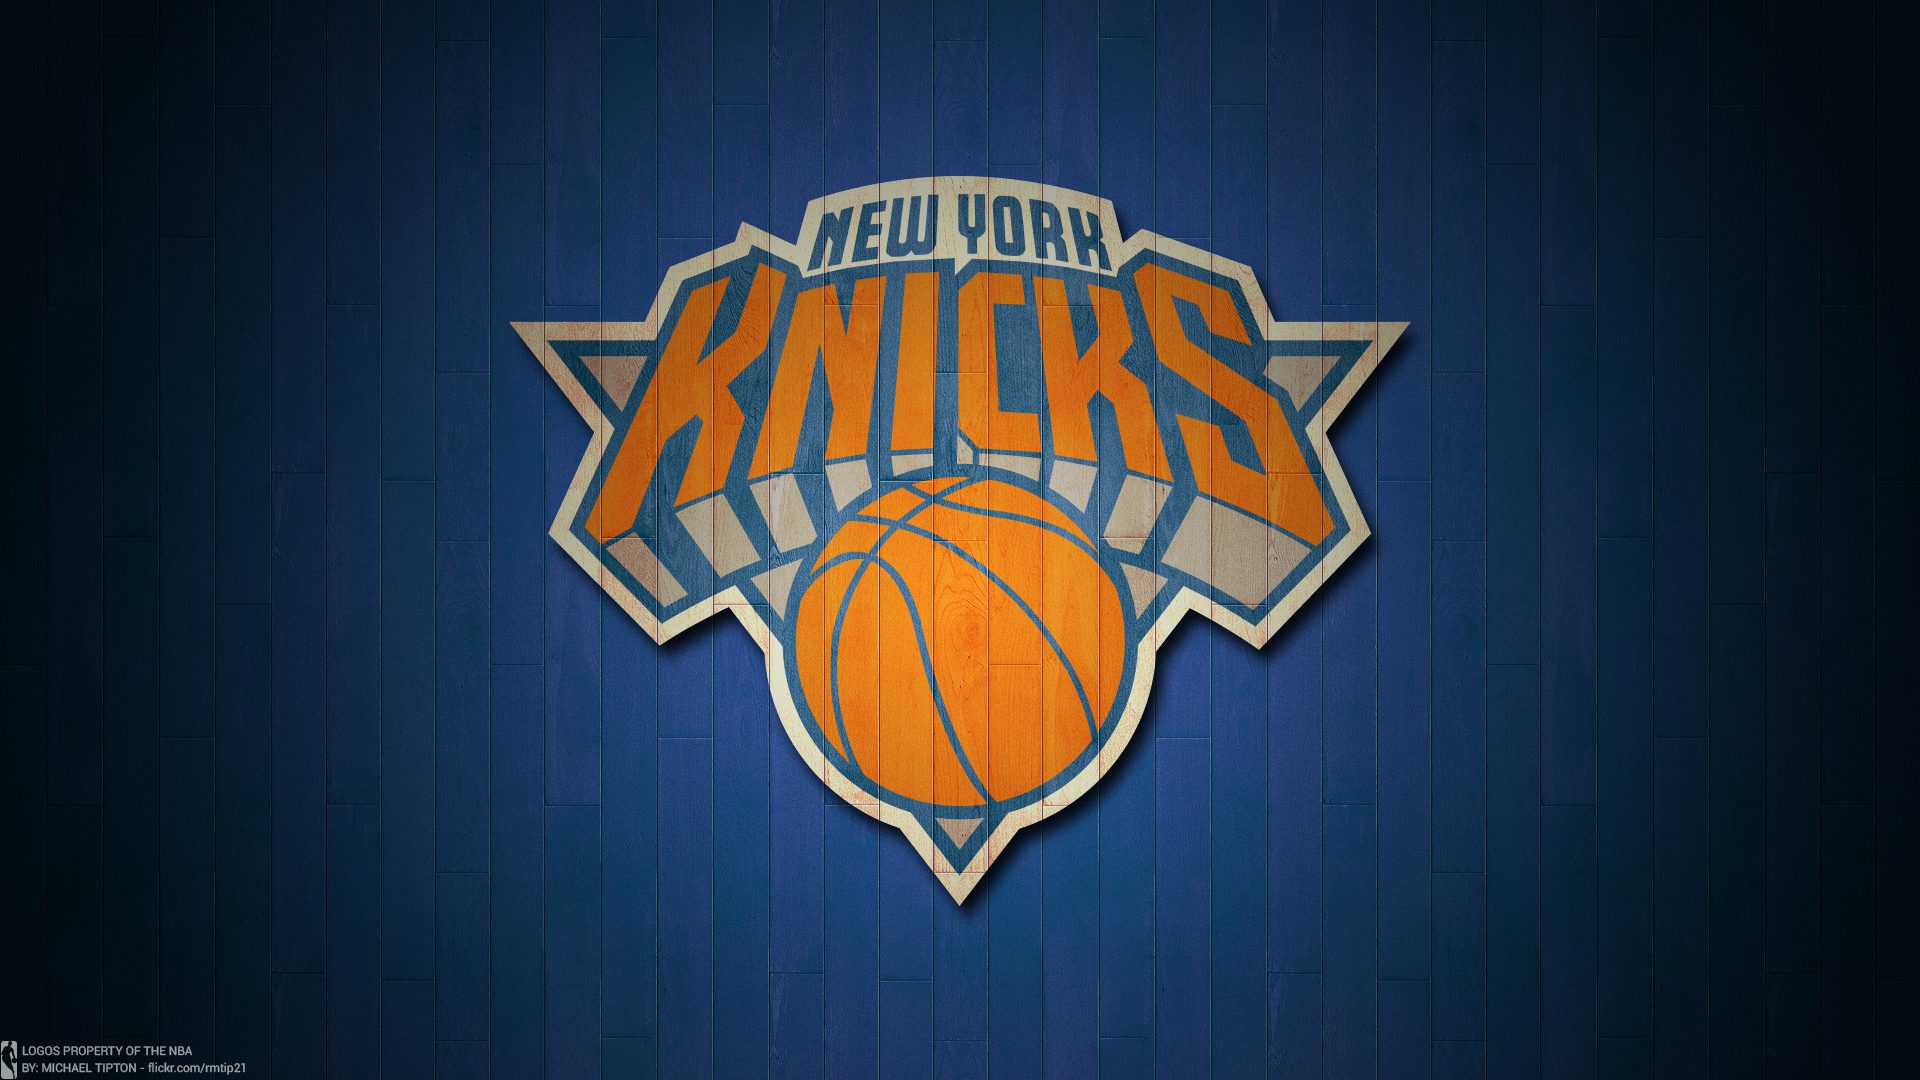 Knickstape Forum 2018, Yankees: WHAT is at 2nd; I DON'T KNOW is at 3rd